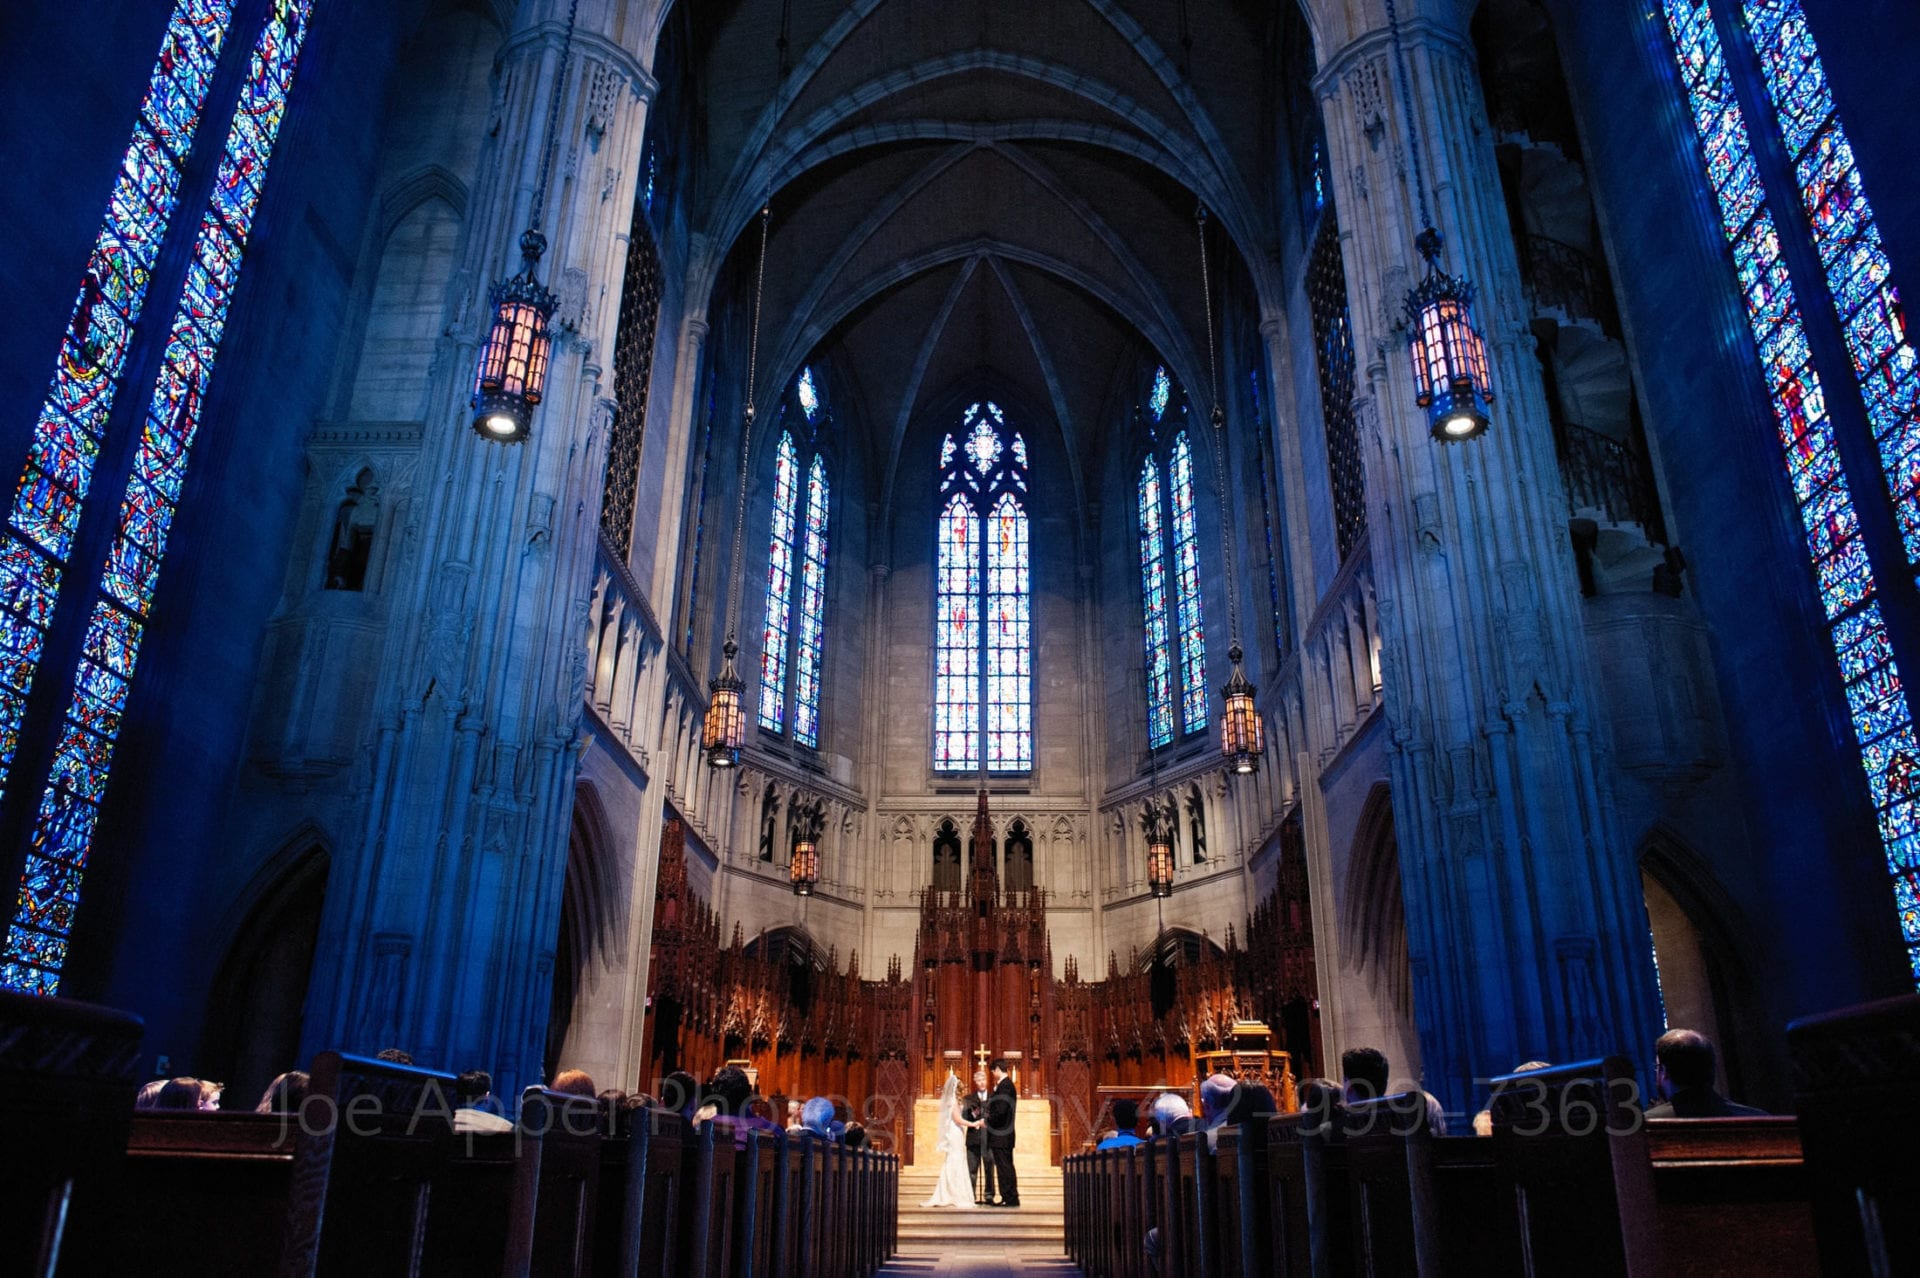 expansive shot of the interior of heinz chapel. The stained glass windows let in purple and blue light while the couple is in warm light in the center.